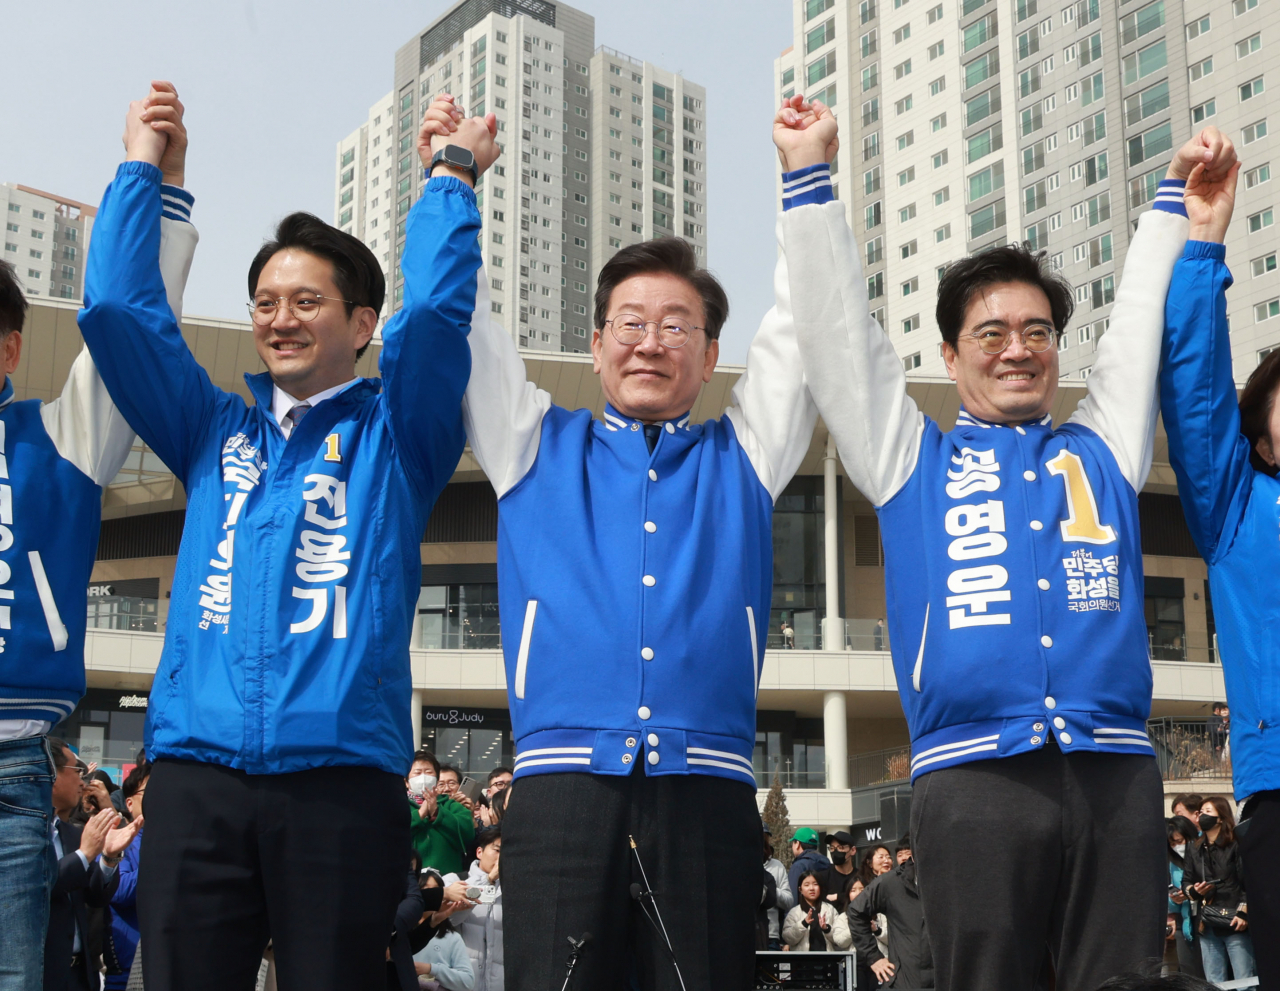 Kong Young-woon (right), the candidate for the Hwaseong-B electoral district representing the main opposition Democratic Party of Korea, poses with Democratic Party Chair Rep. Lee Jae-myung during their visit to Dongtan, a commuter city in Hwaseong, Gyeonggi Province, on March 17. (Yonhap)